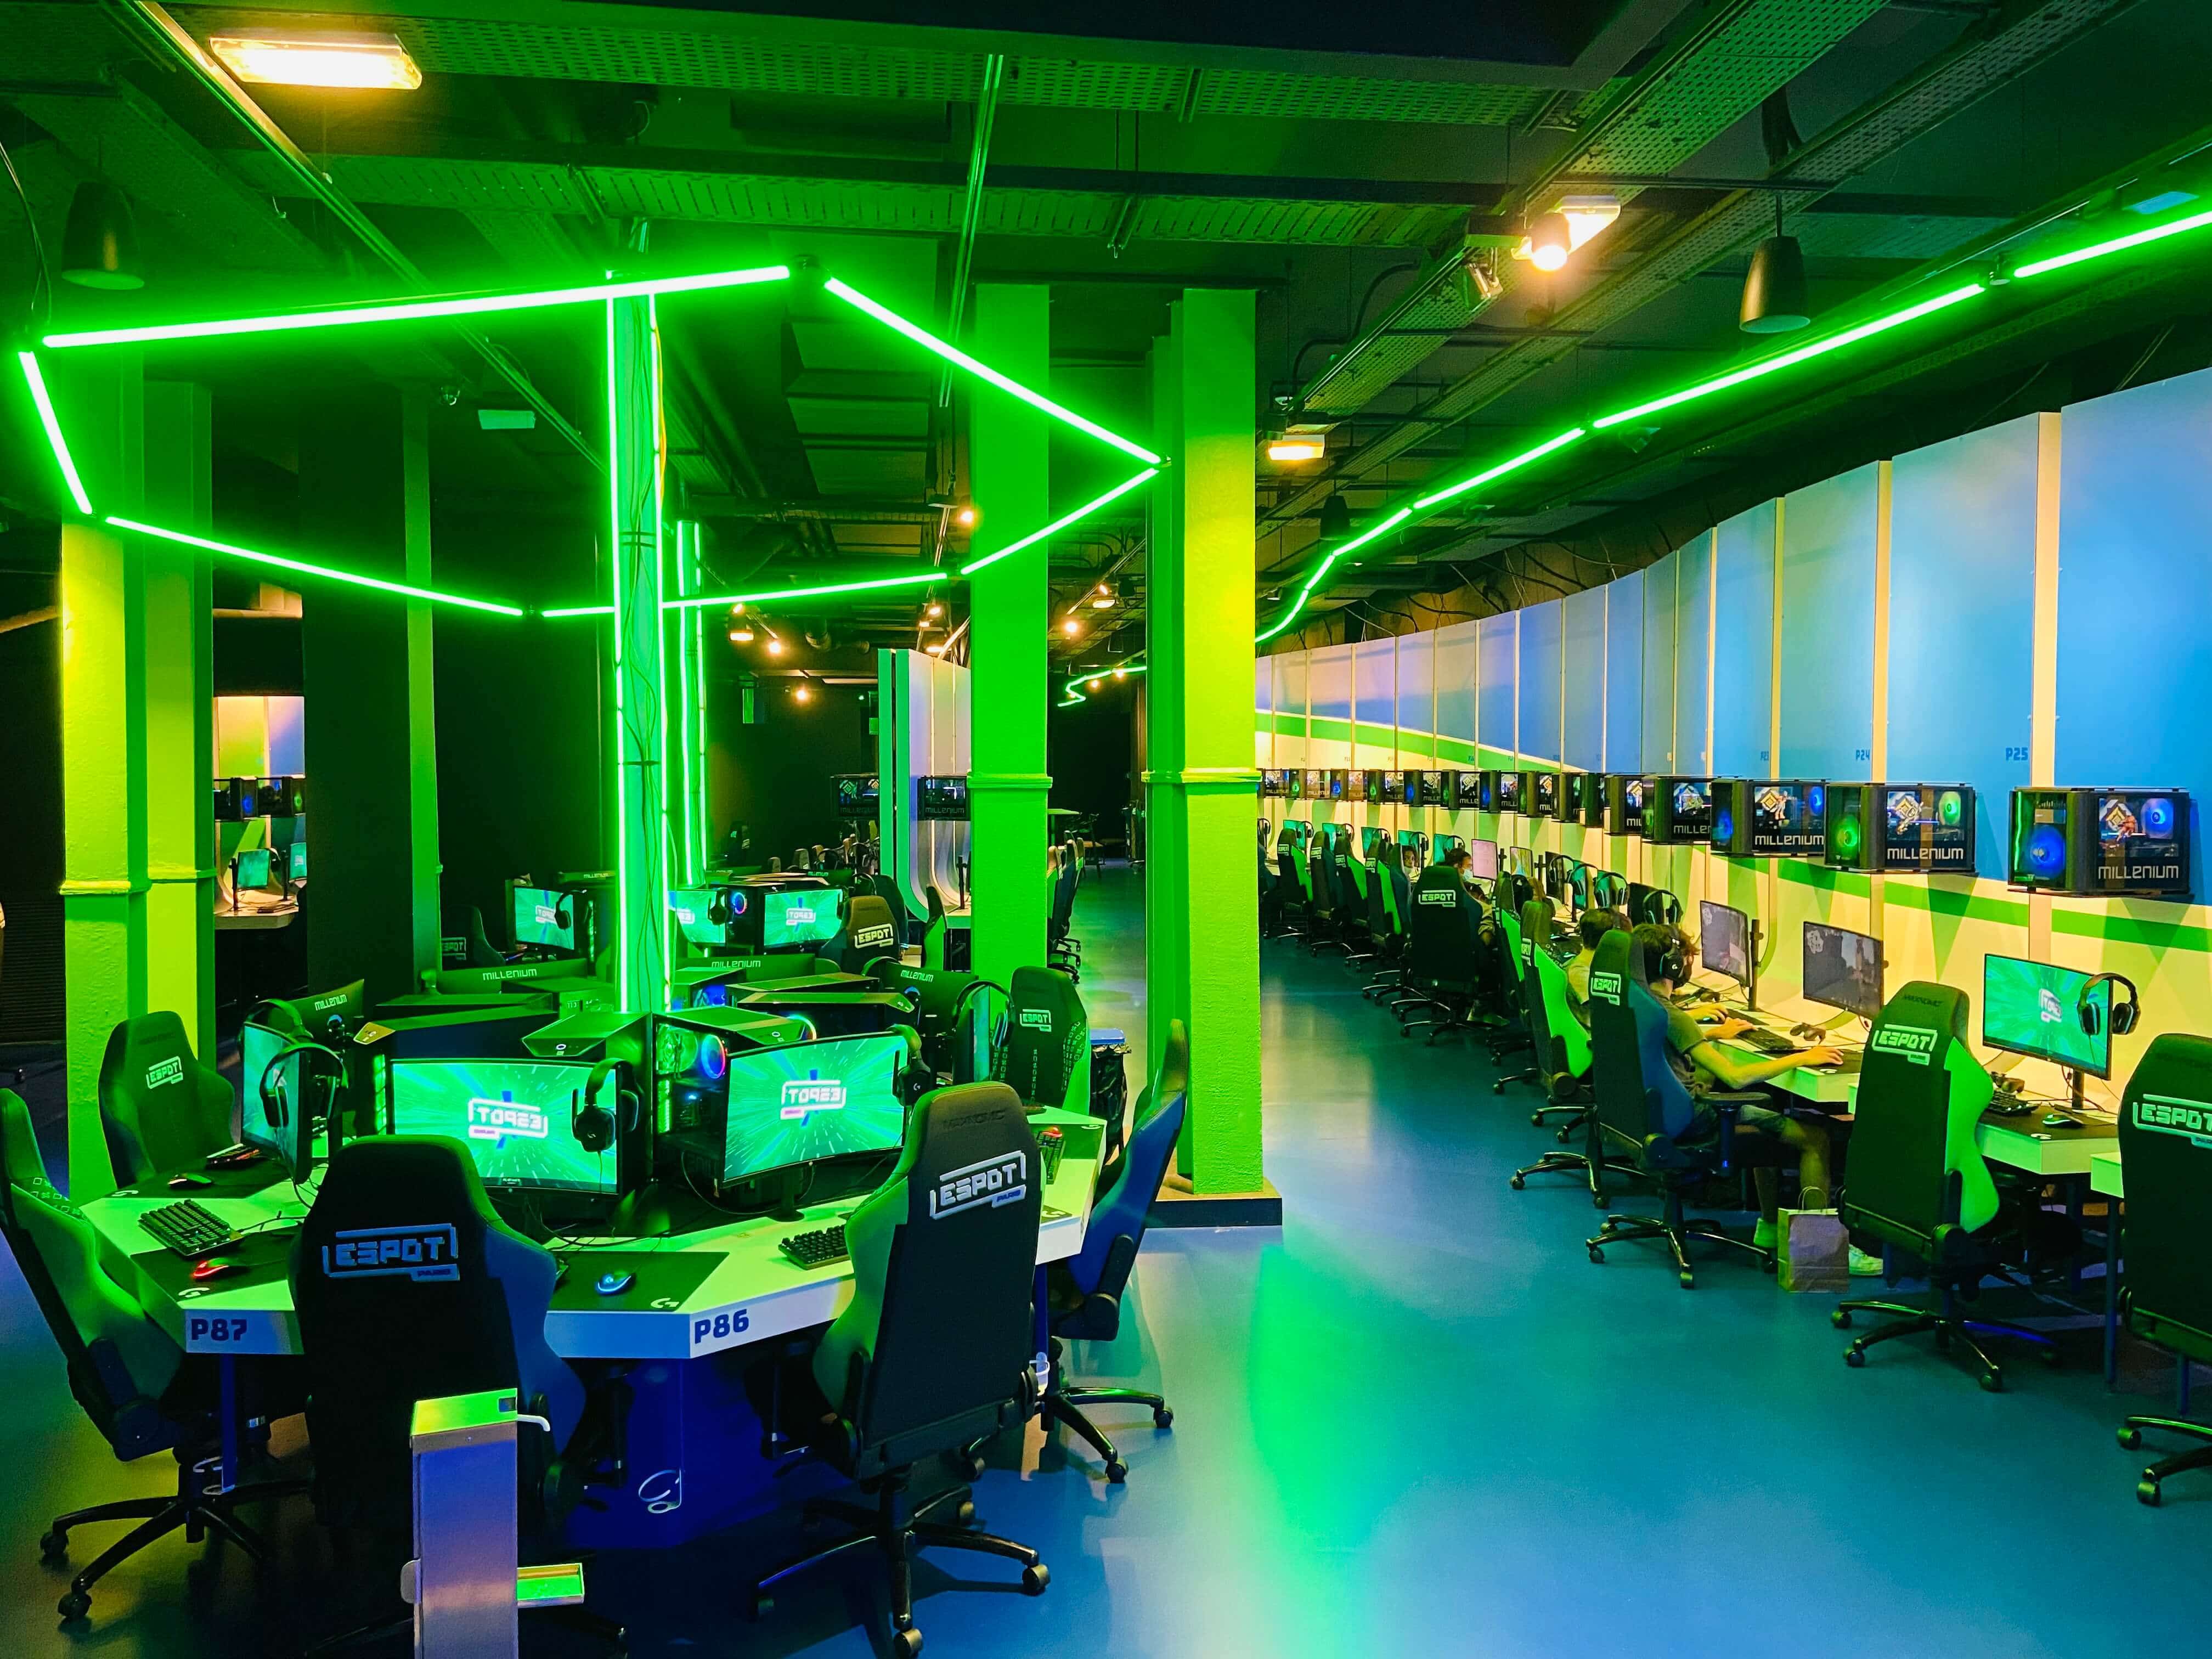 ESpots PC gaming space is both stylish and spacious